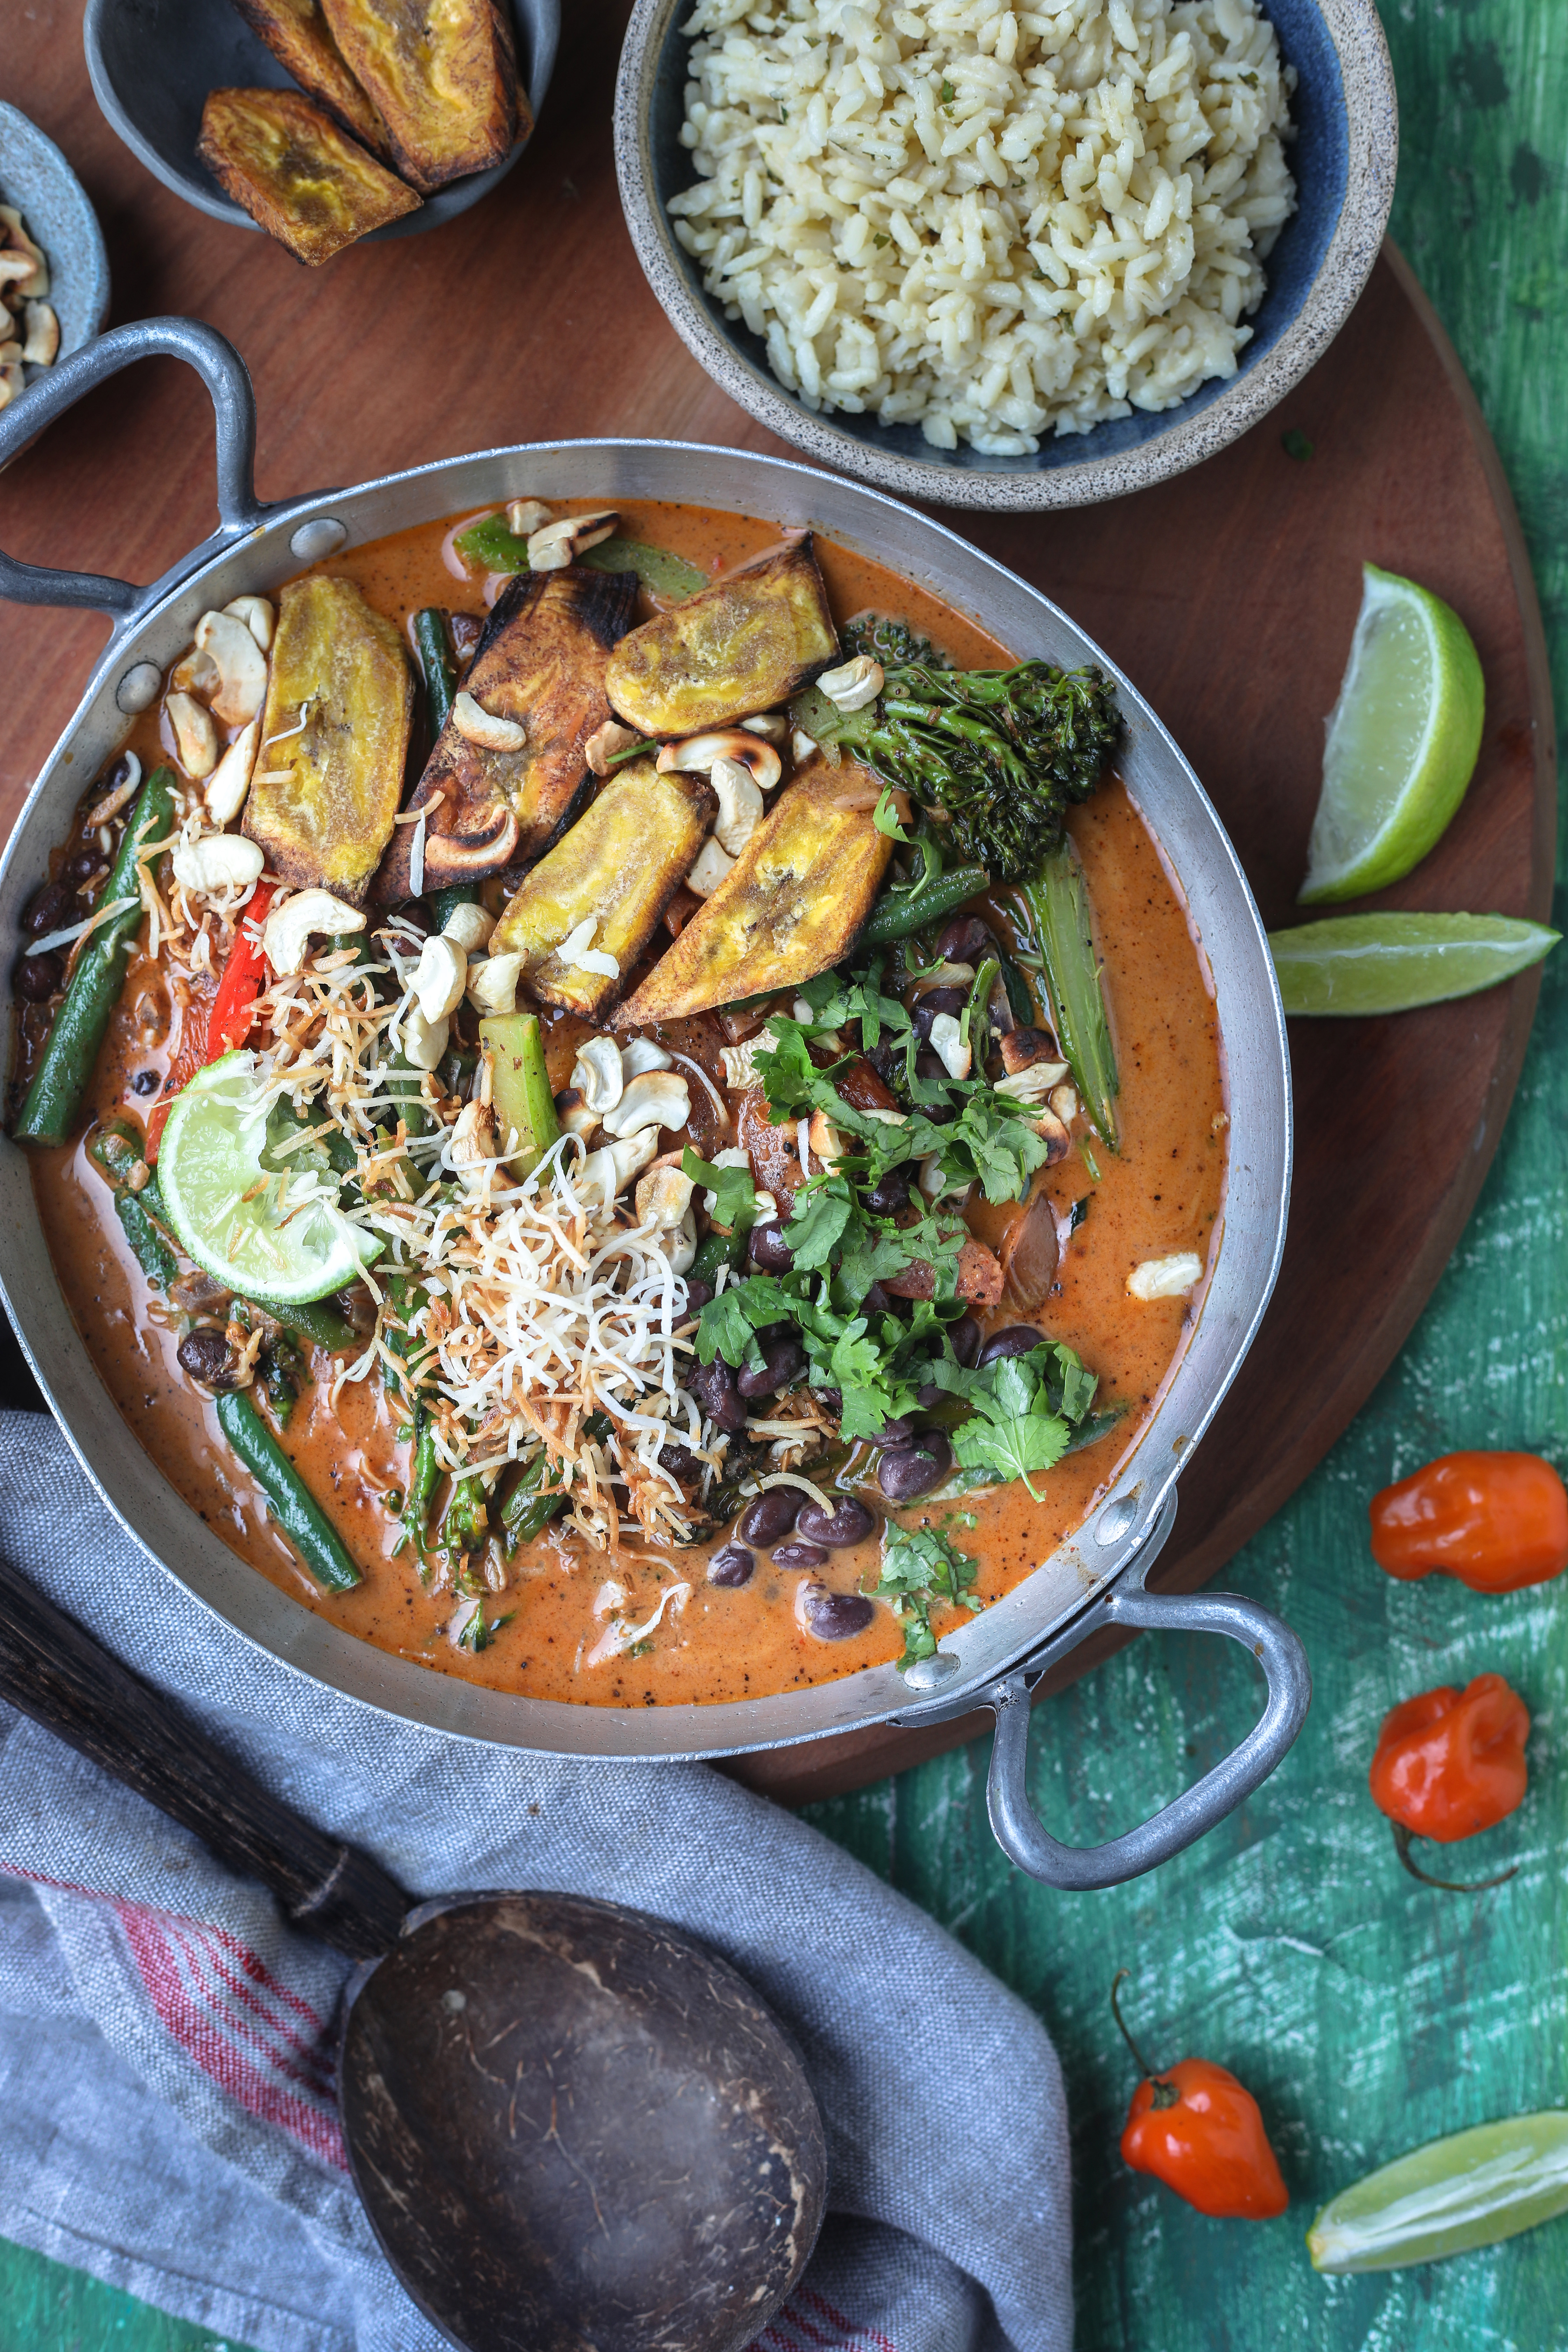 Caribbean style vegetable stew |foodfashionparty| #carribeanfood